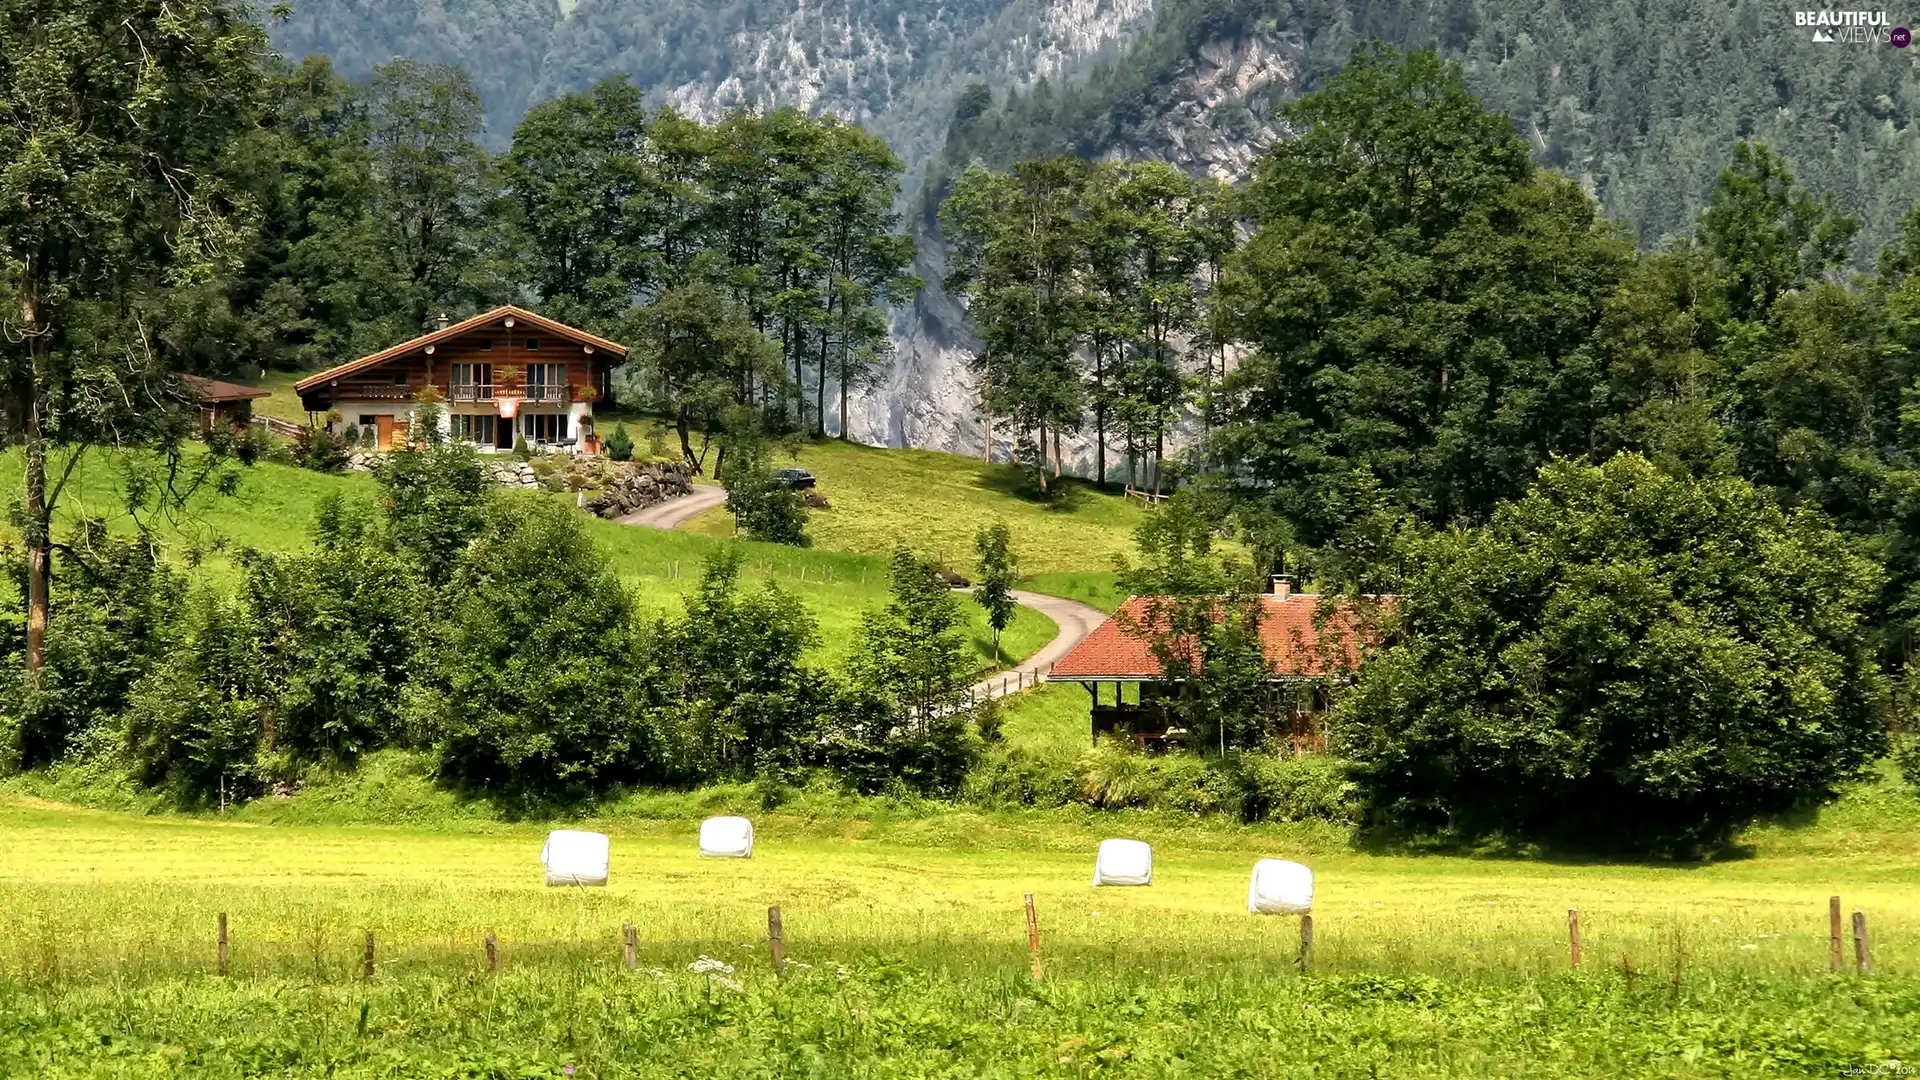 viewes, Mountains, house, HDR, Field, trees